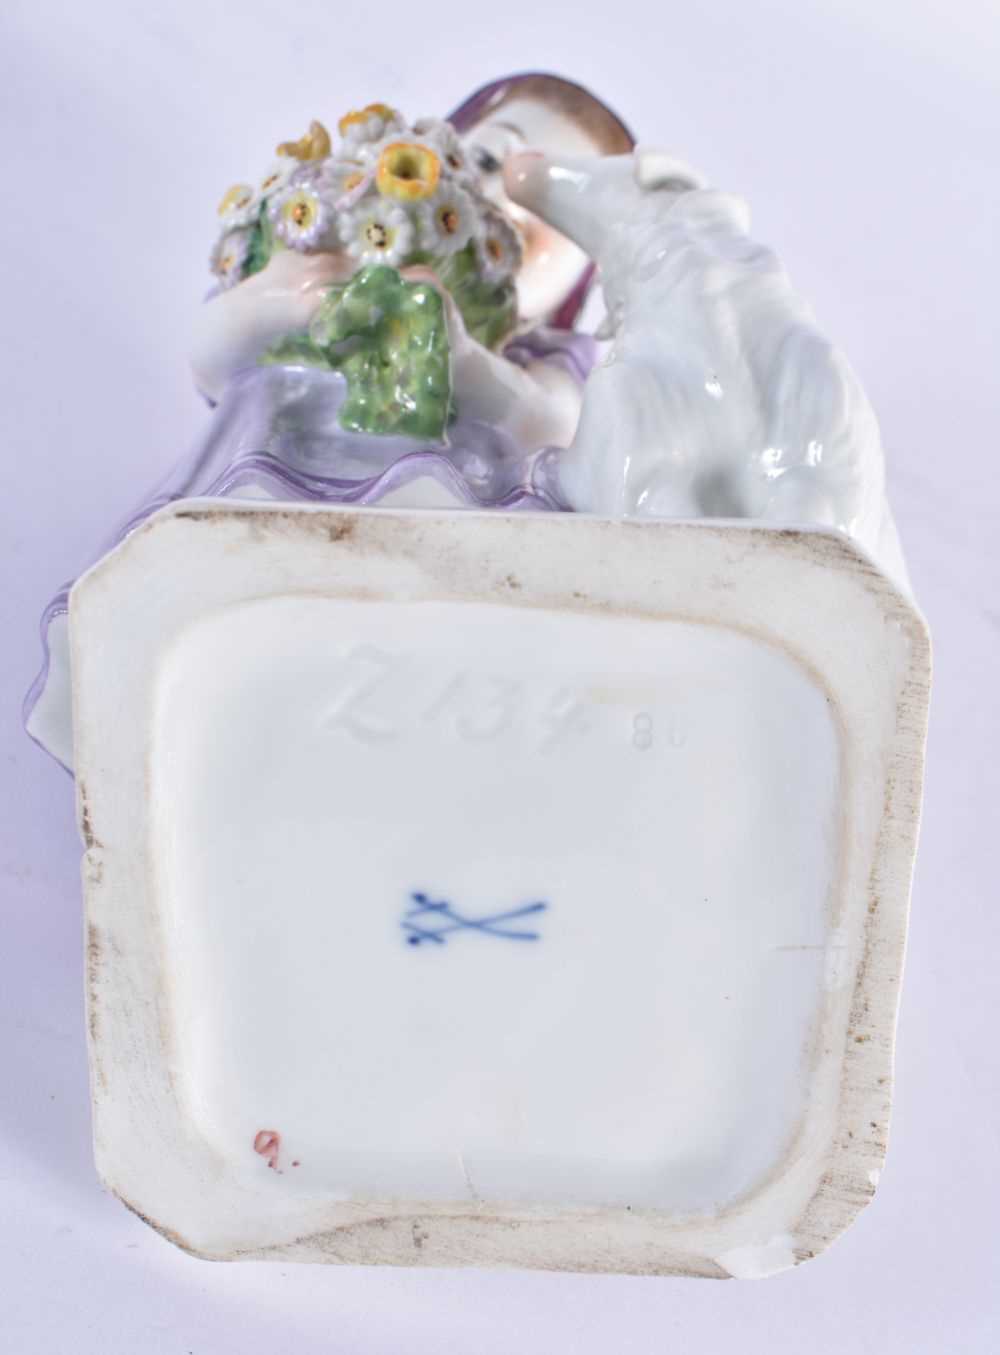 AN UNUSUAL GERMAN MEISSEN PORCELAIN GROUP depicting a child and a young goat. 17 cm high. - Image 5 of 18